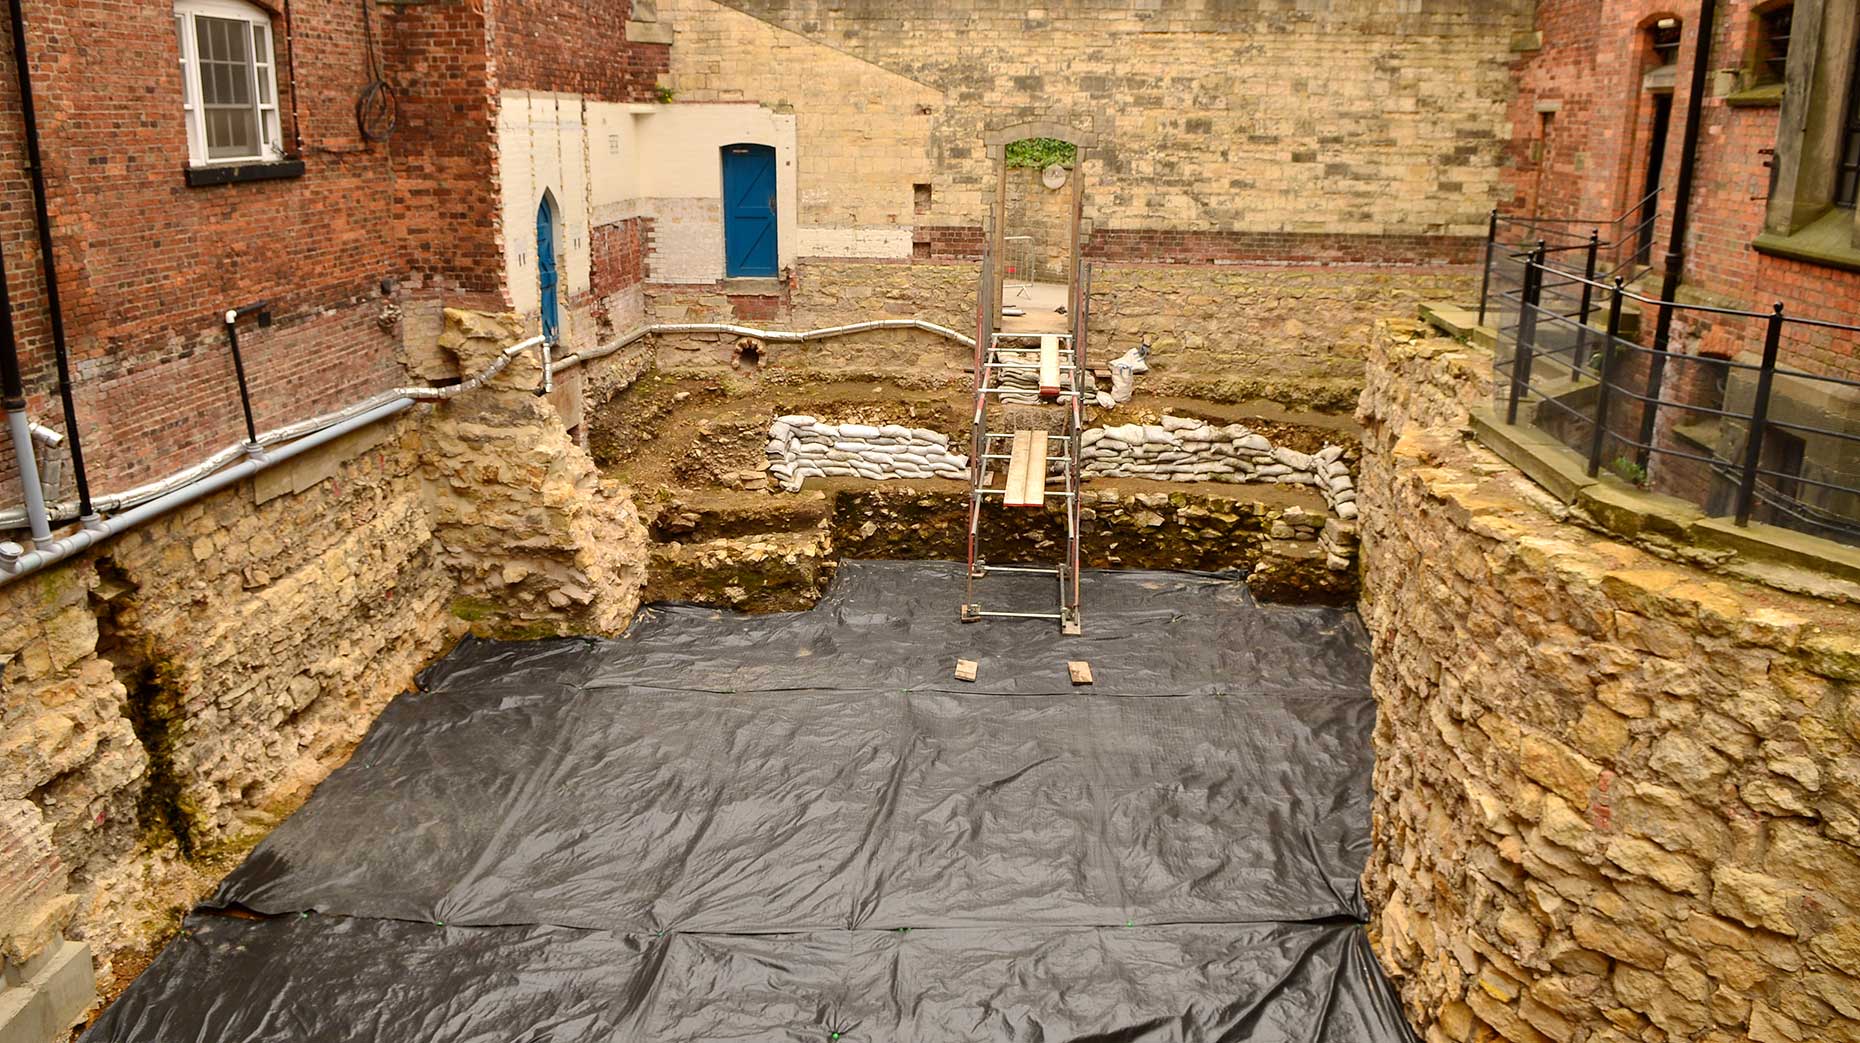 The site of the Magna Carta vault. Photo: Steve Smailes for The Lincolnite